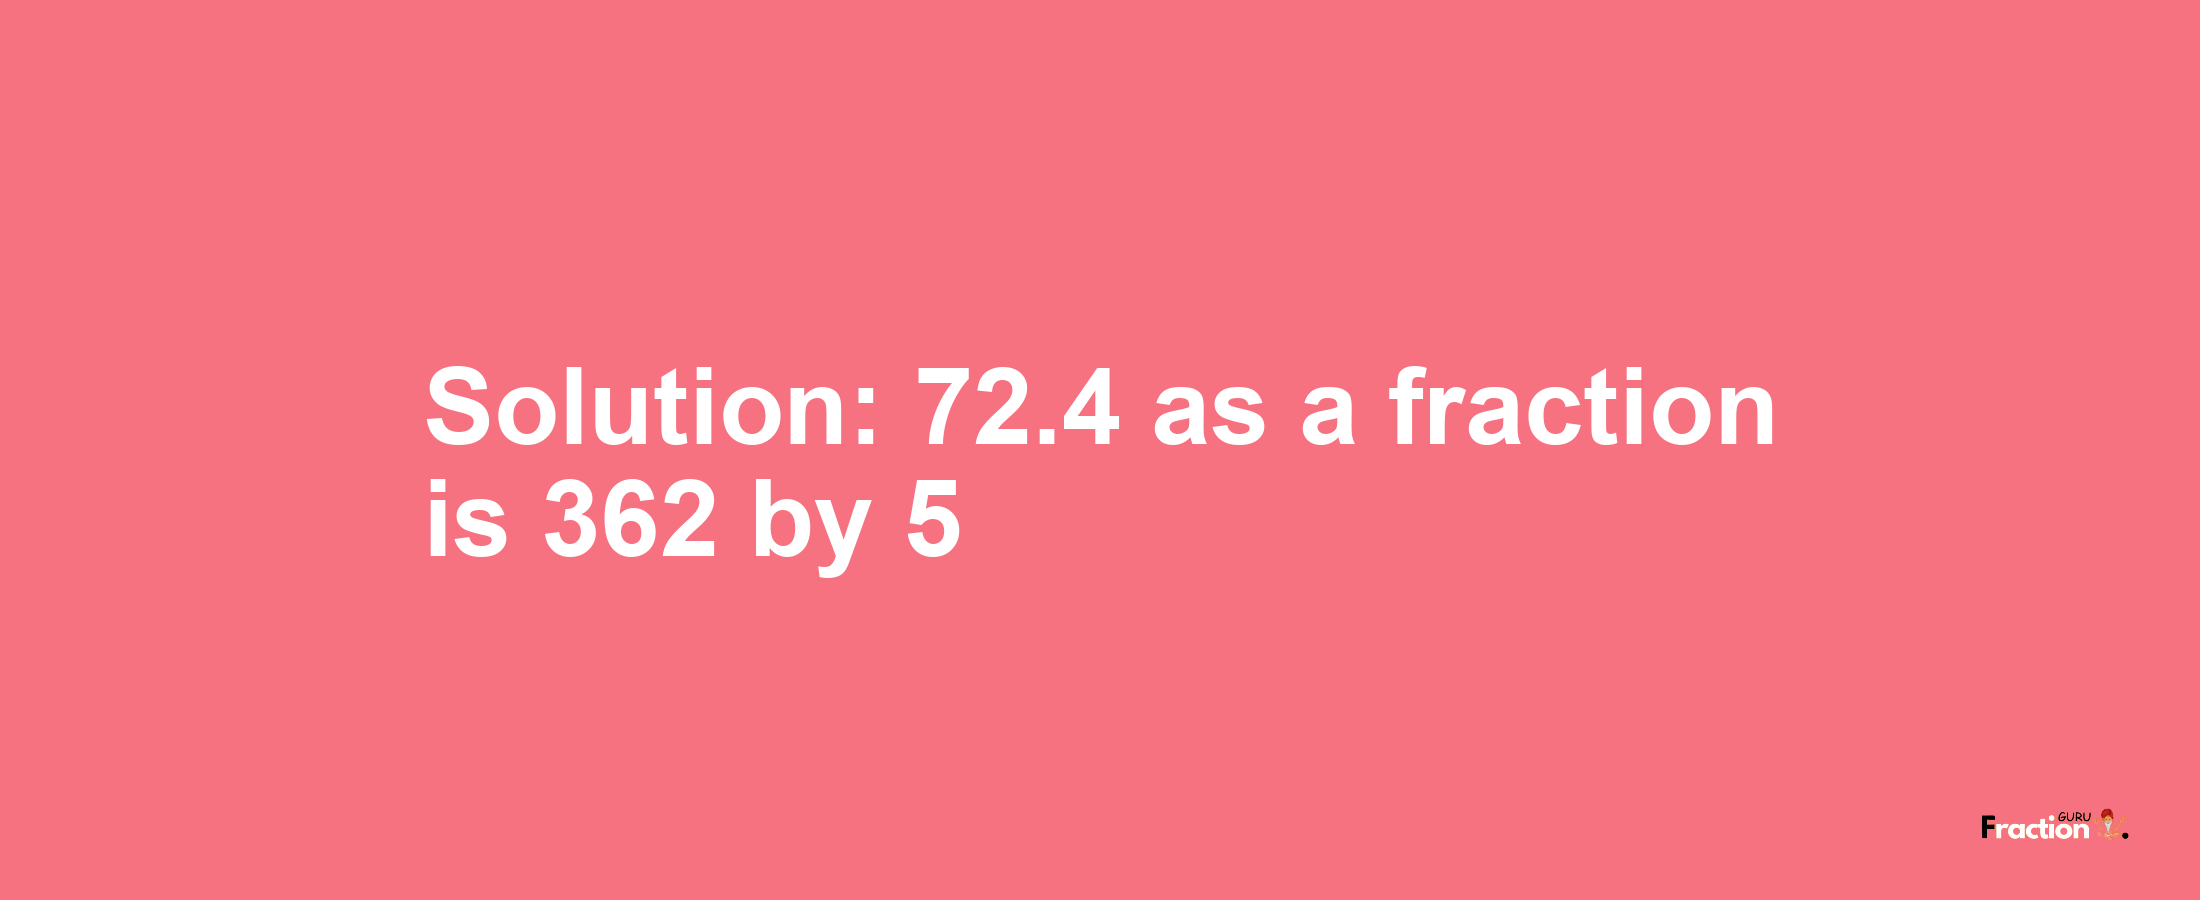 Solution:72.4 as a fraction is 362/5